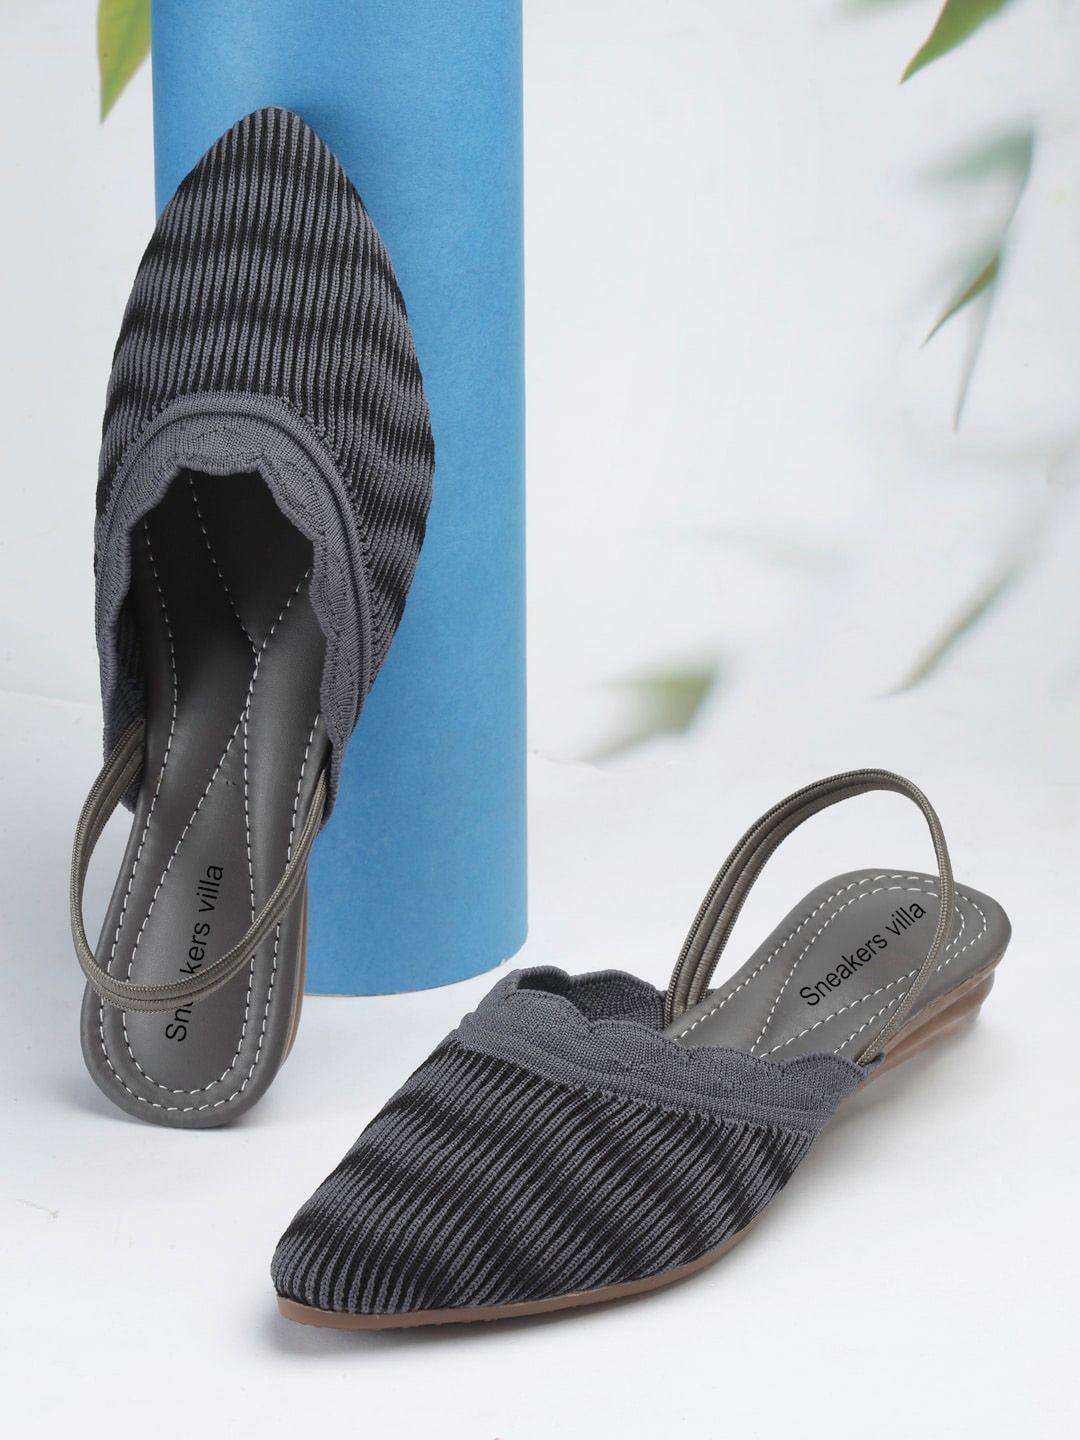 sneakers villa women grey striped mules with bows flats